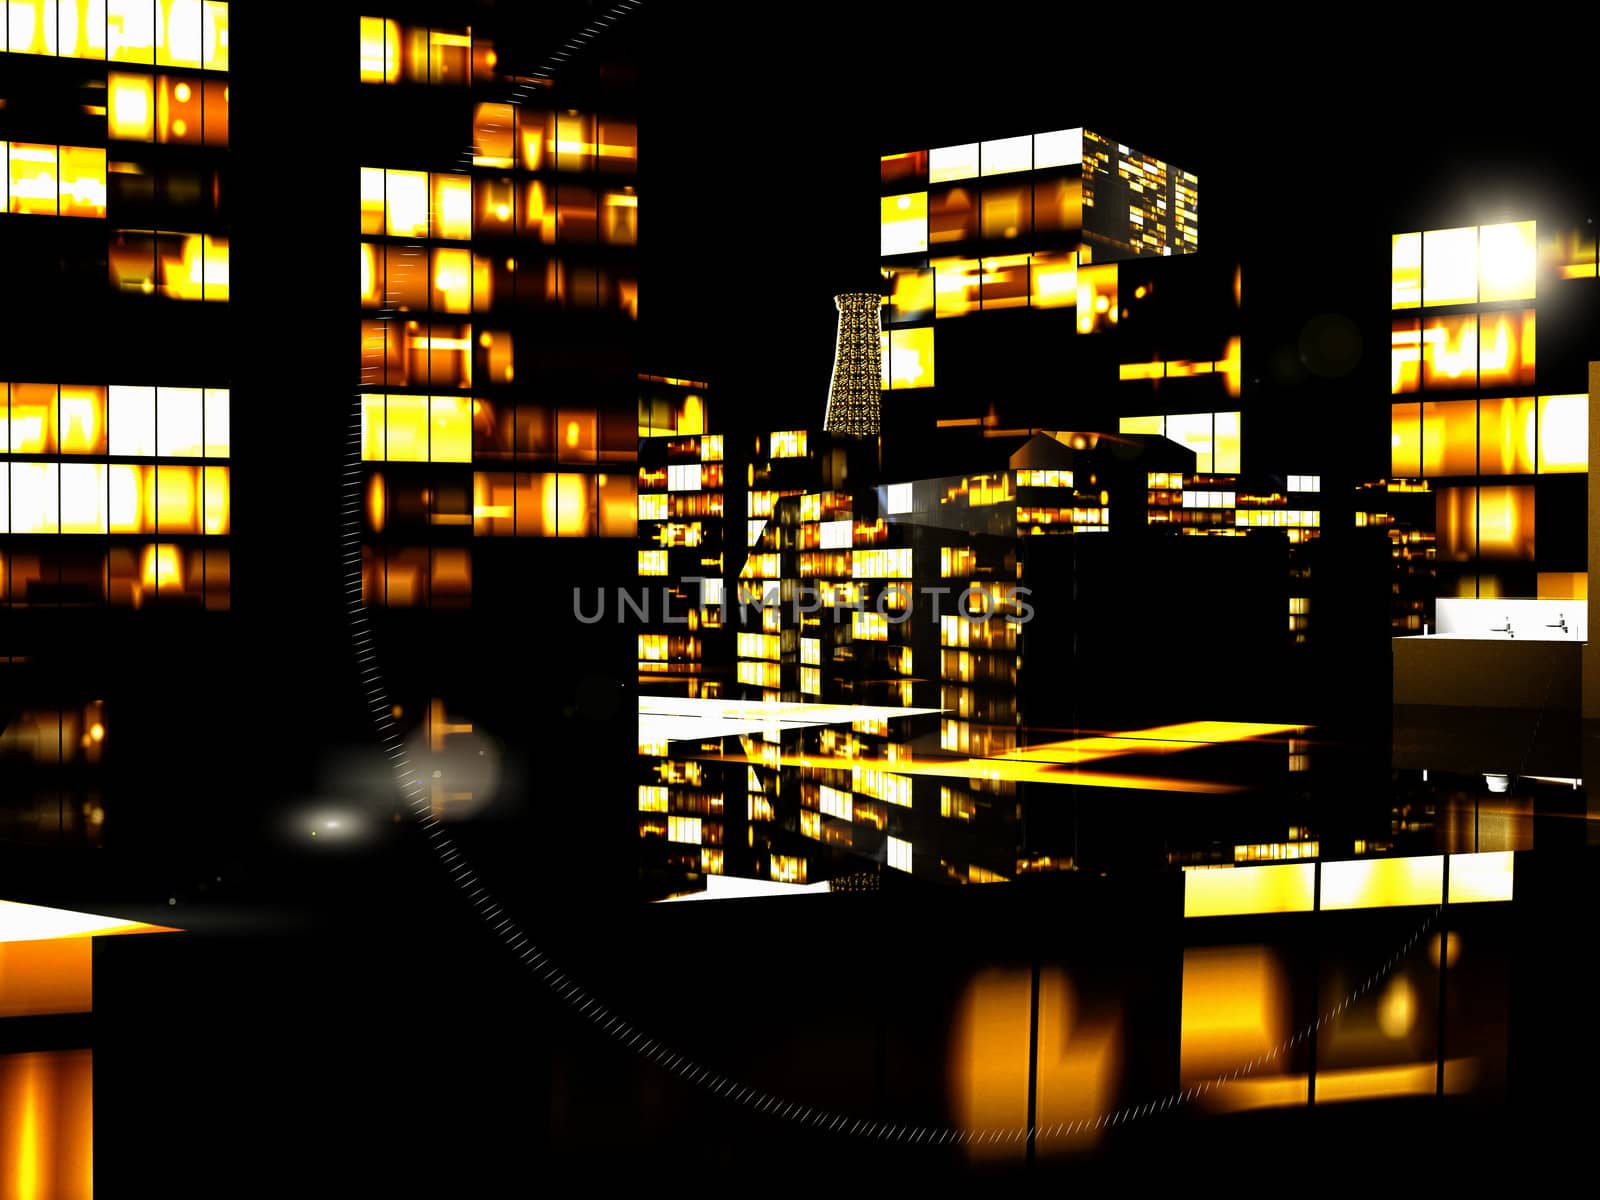 Business District at Night by andromeda13